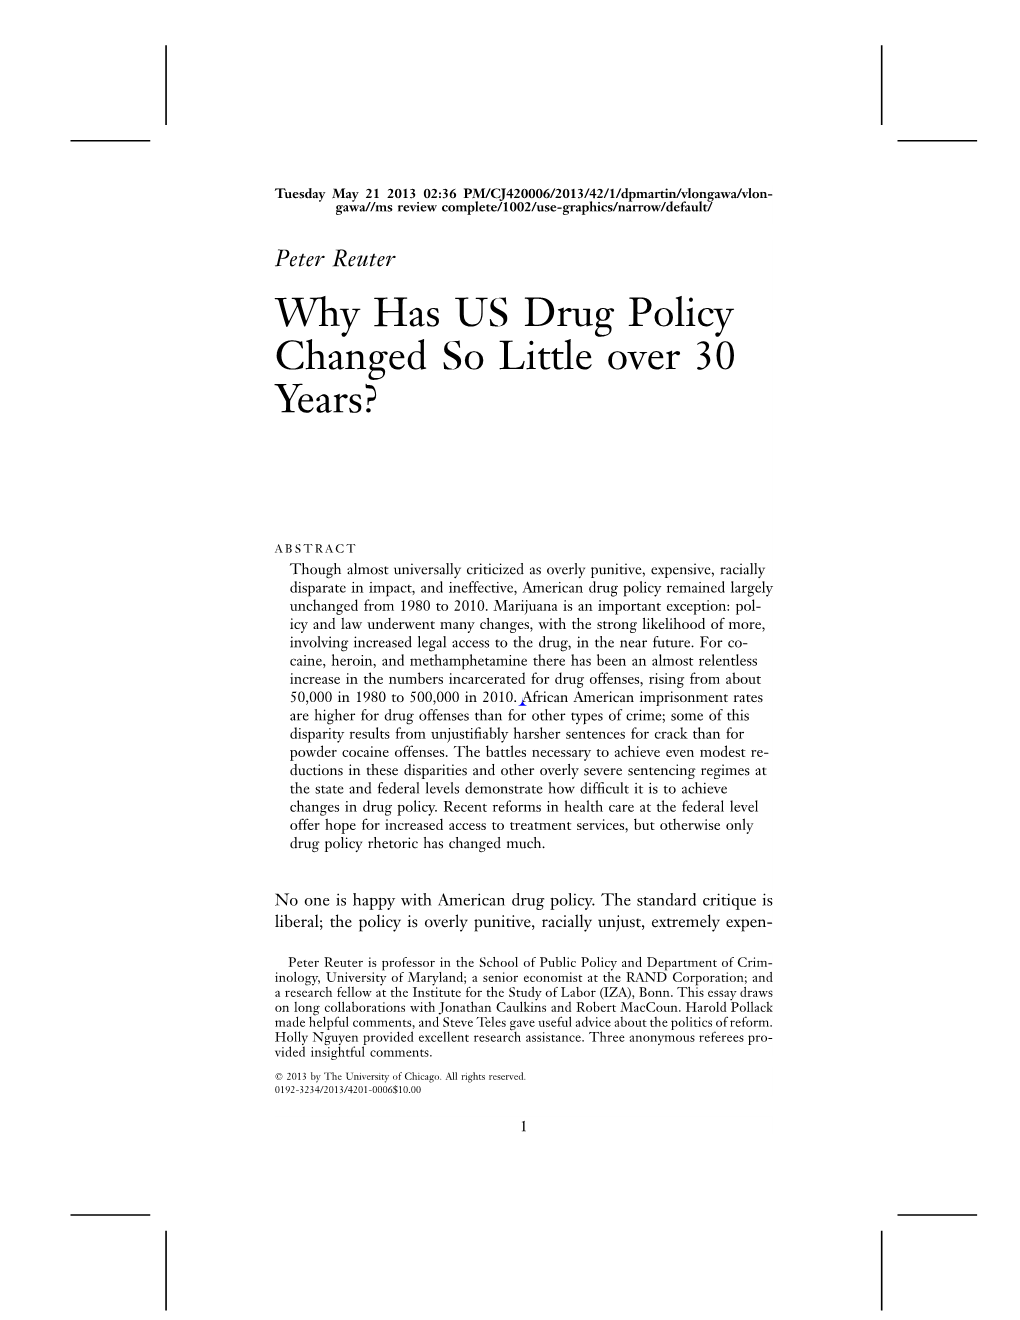 Why Has US Drug Policy Changed So Little Over 30 Years?